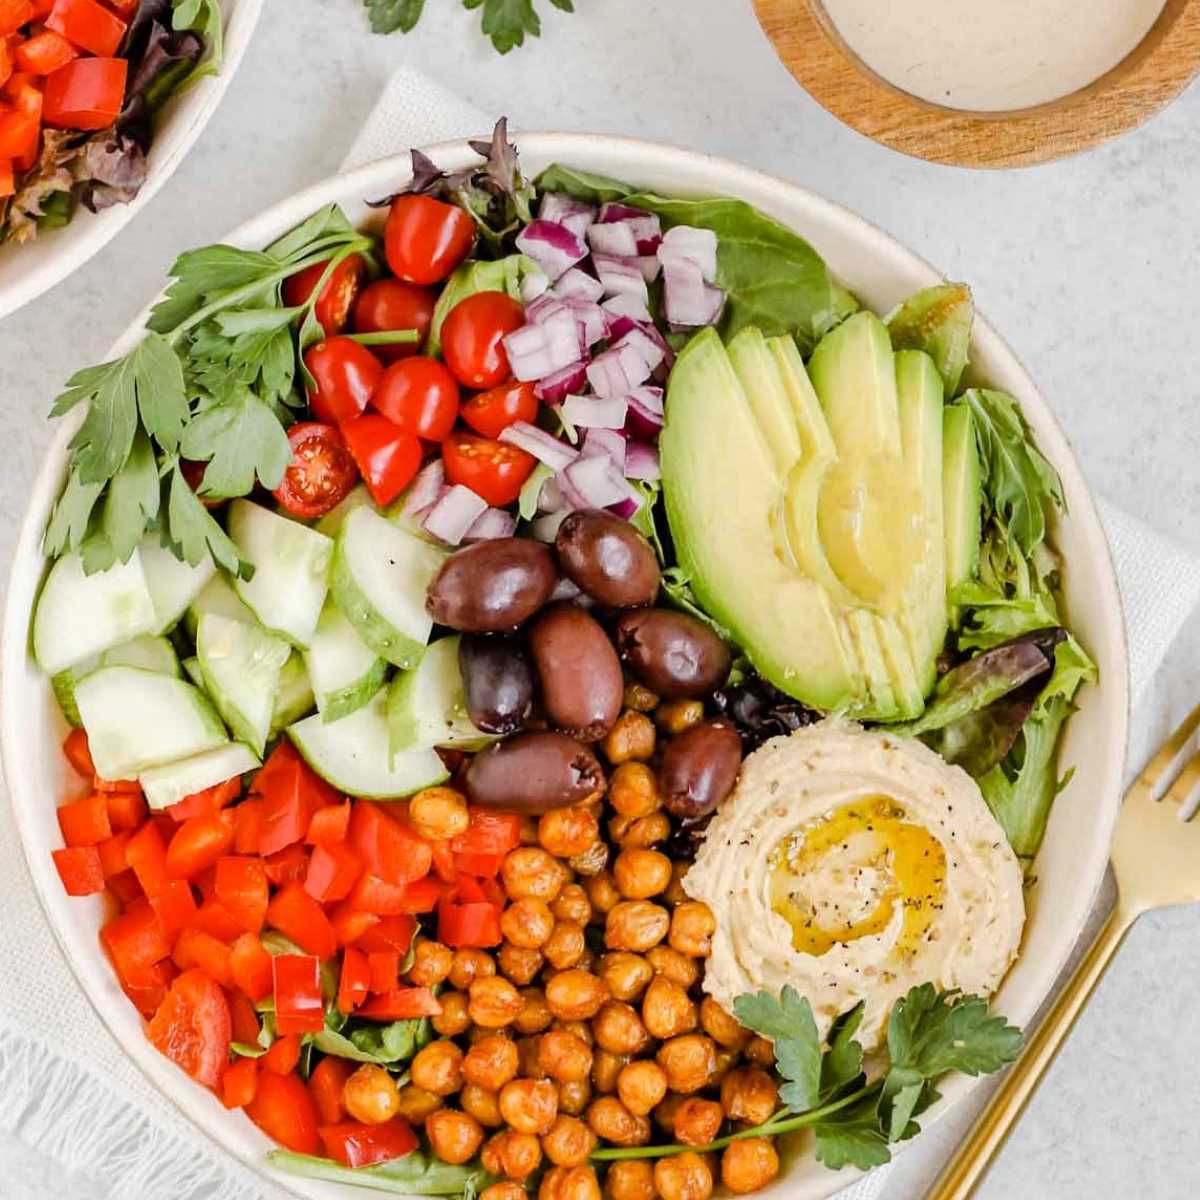 Buddha bowl filled with avocado, chopped veggies, olives and chickpeas.